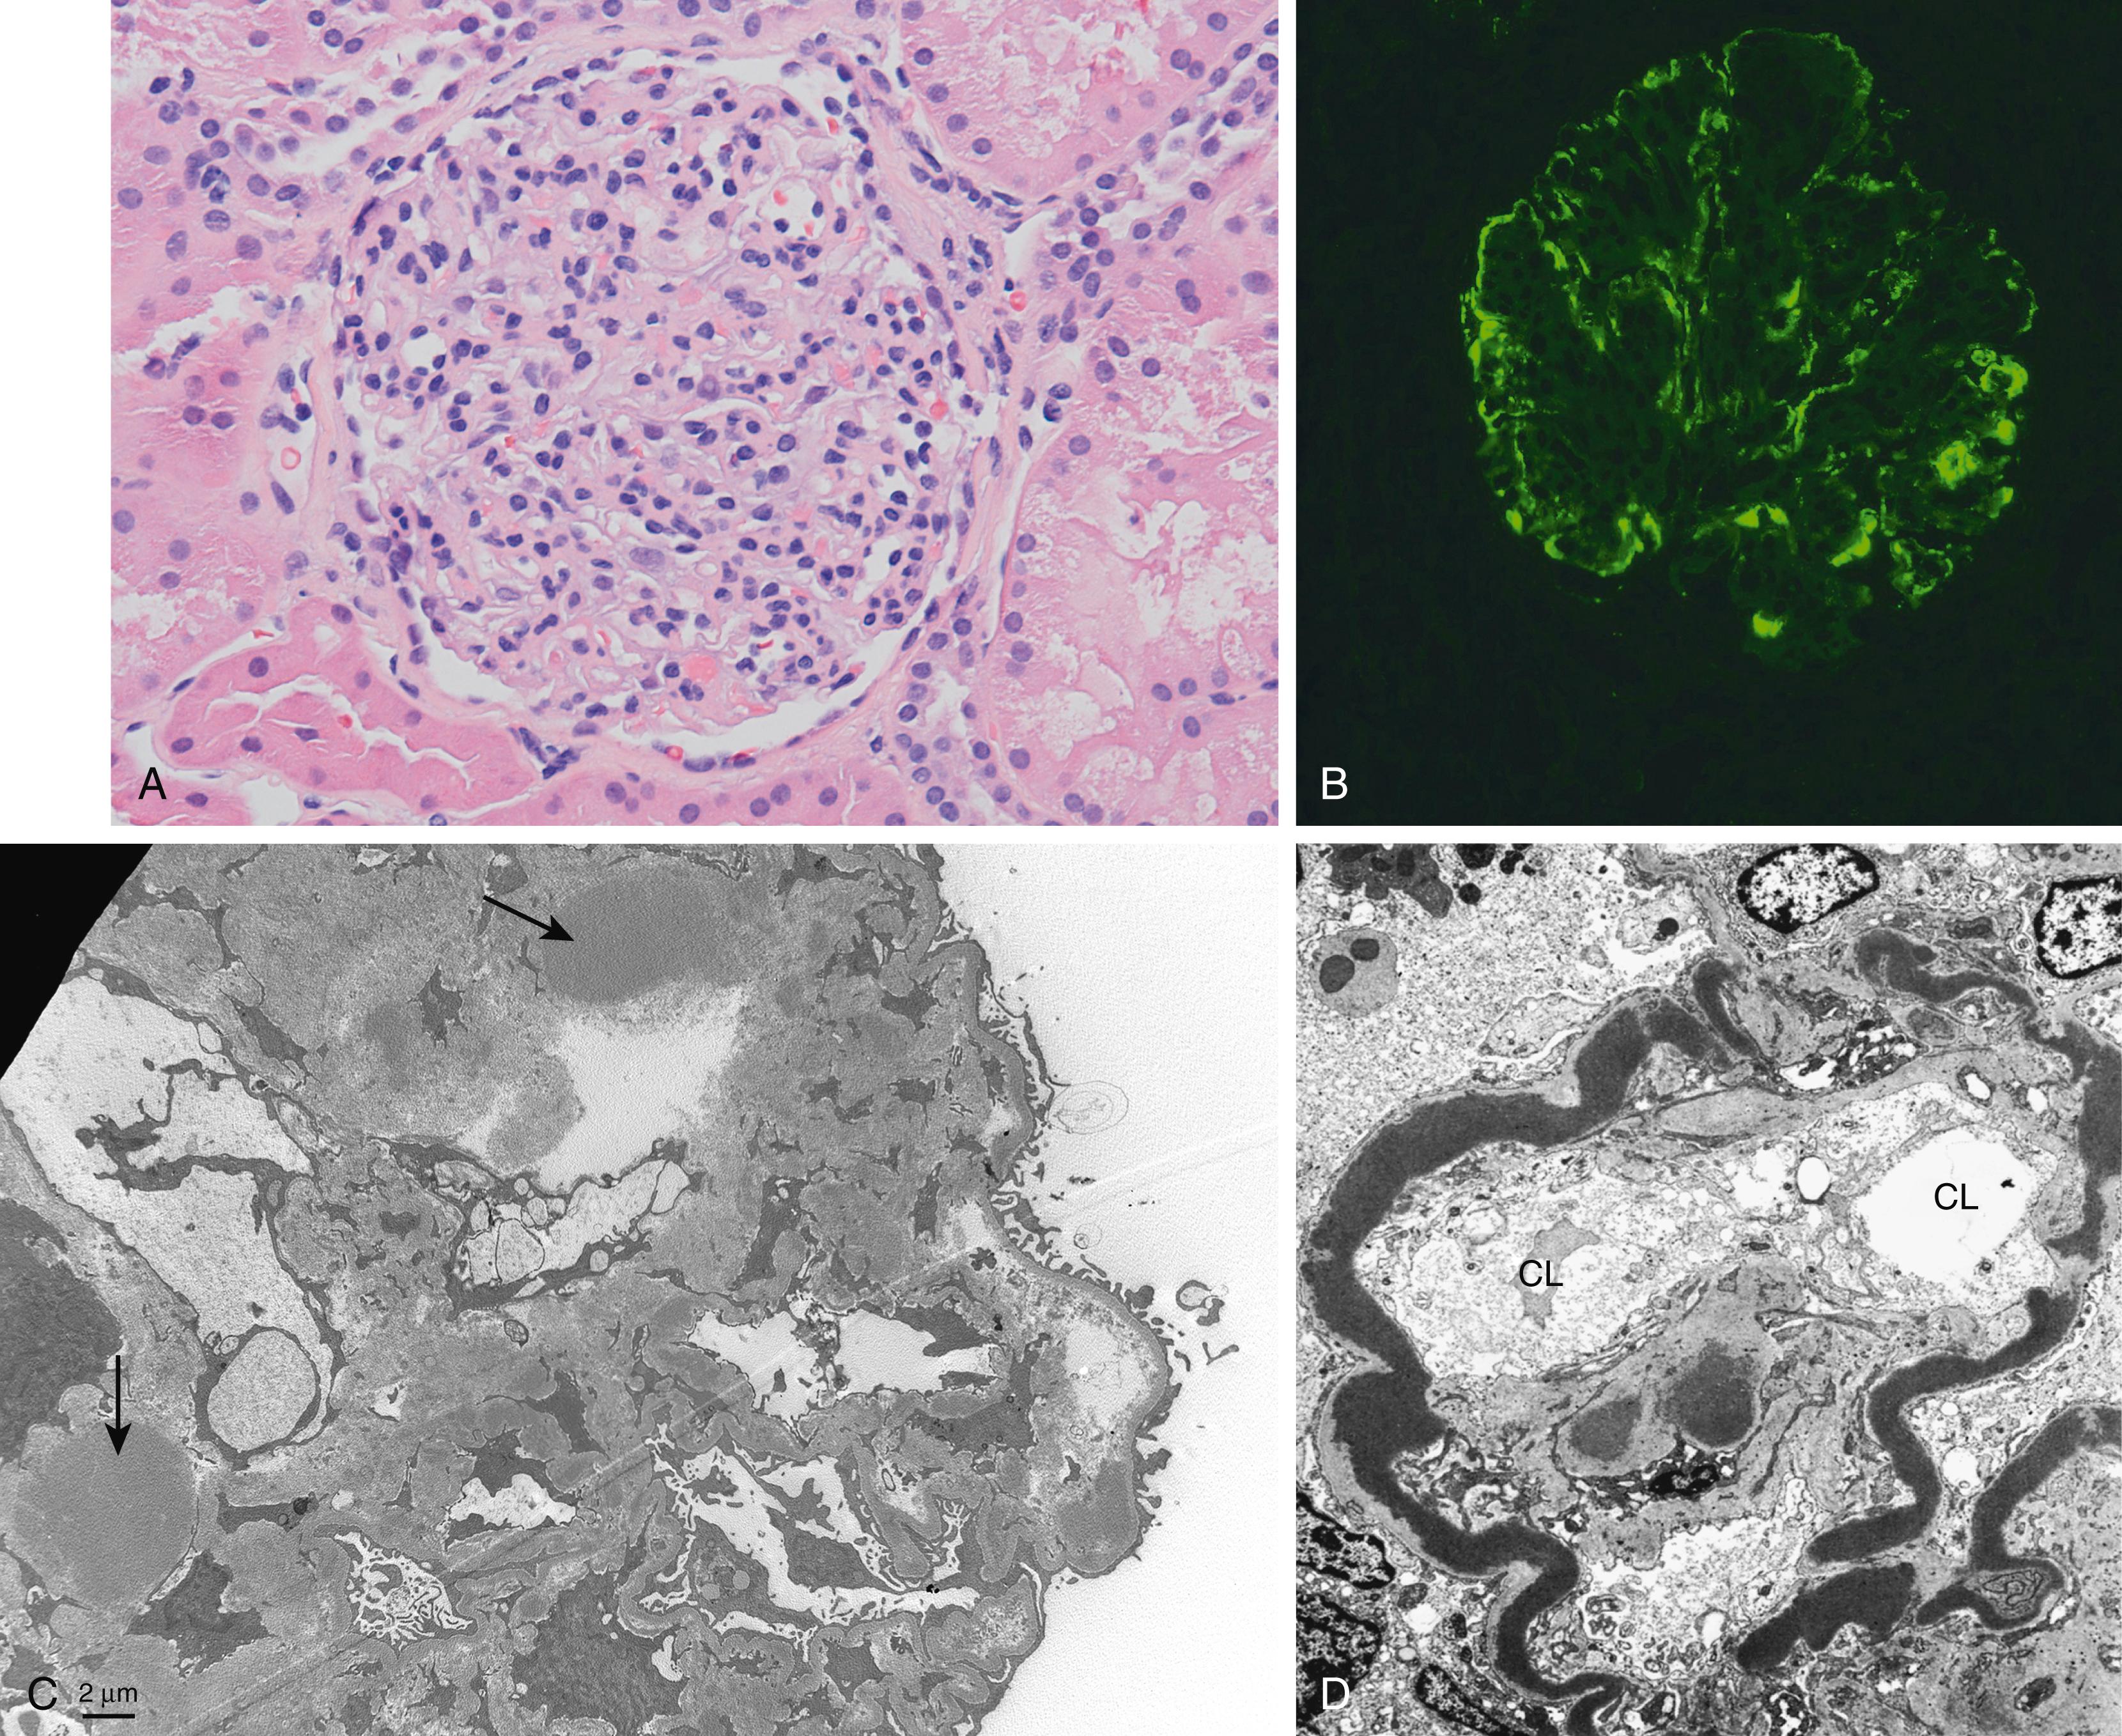 FIG. 12.8, C3 glomerulopathy. (A) Glomerulus showing hypercellularity and increased mesangial matrix. (B) Granular deposits of C3b in the GBM and mesangium. (C) “Waxy” electron-dense deposits in the mesangium (arrows) . (D) In dense deposit disease, there are dense homogeneous deposits within the basement membrane.